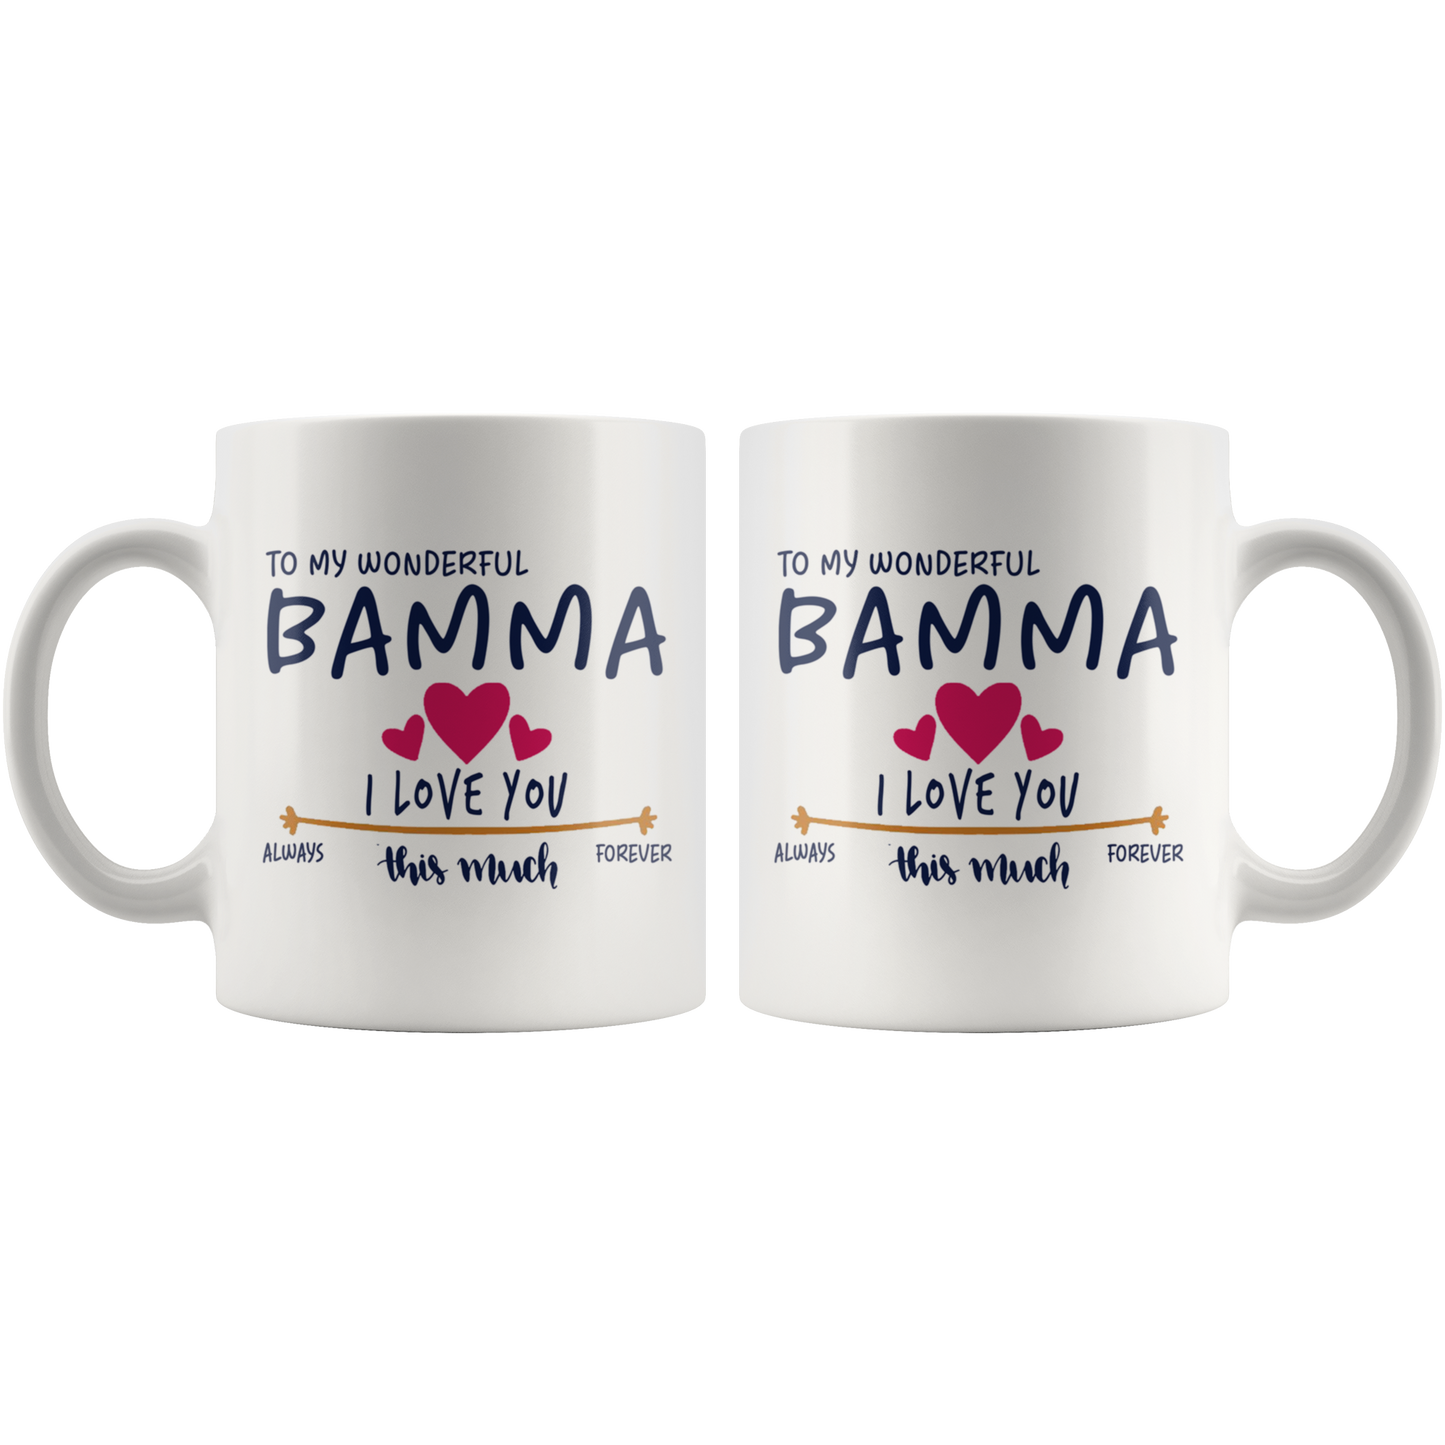 M-20470331-sp-26527 - [ Bamma | 1 ] (mug_11oz_white) Valentines Day Mug Gifts For Father, Mother, Grandfather, Gr